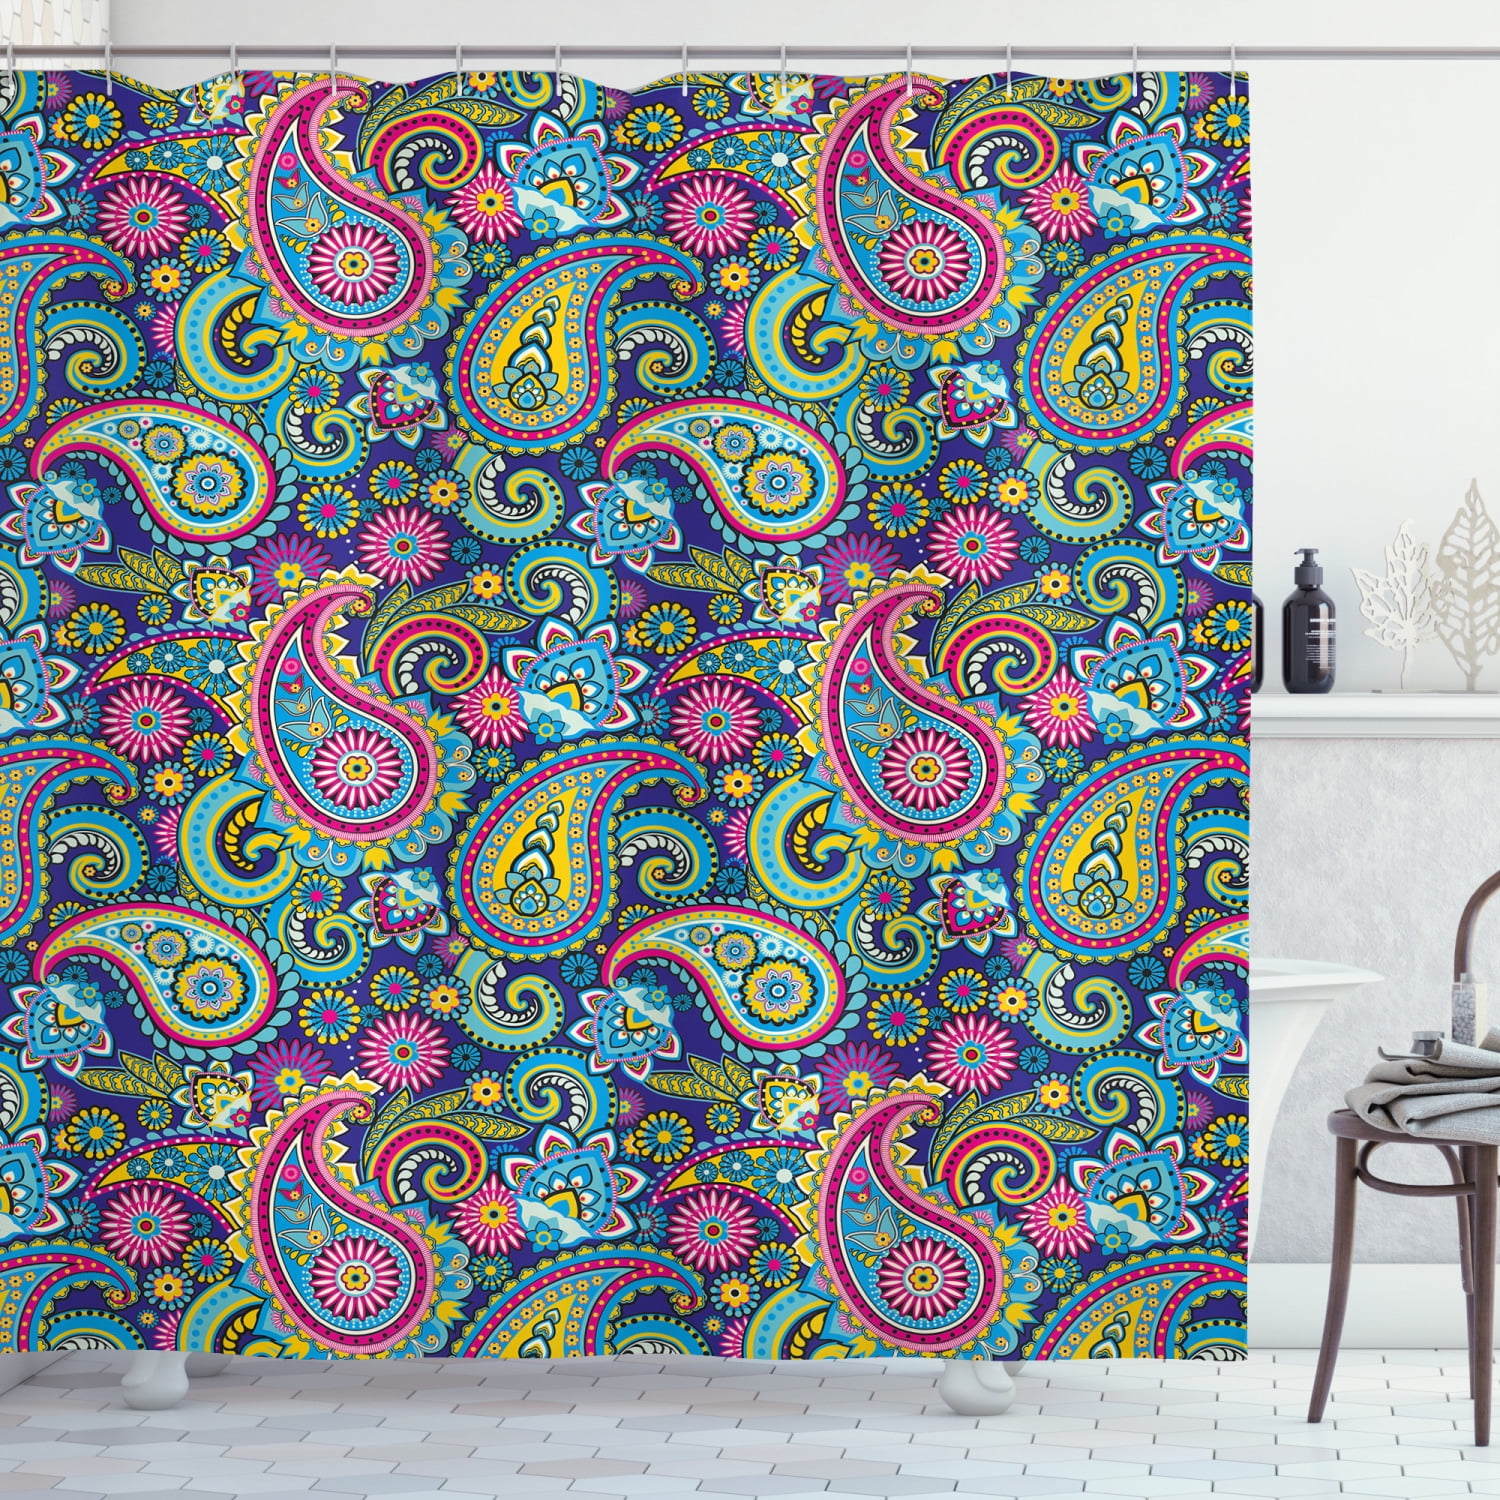 Paisley Decor Indian Mandala Vintage and Rustic Shower Curtain Extra Long 84Inch 